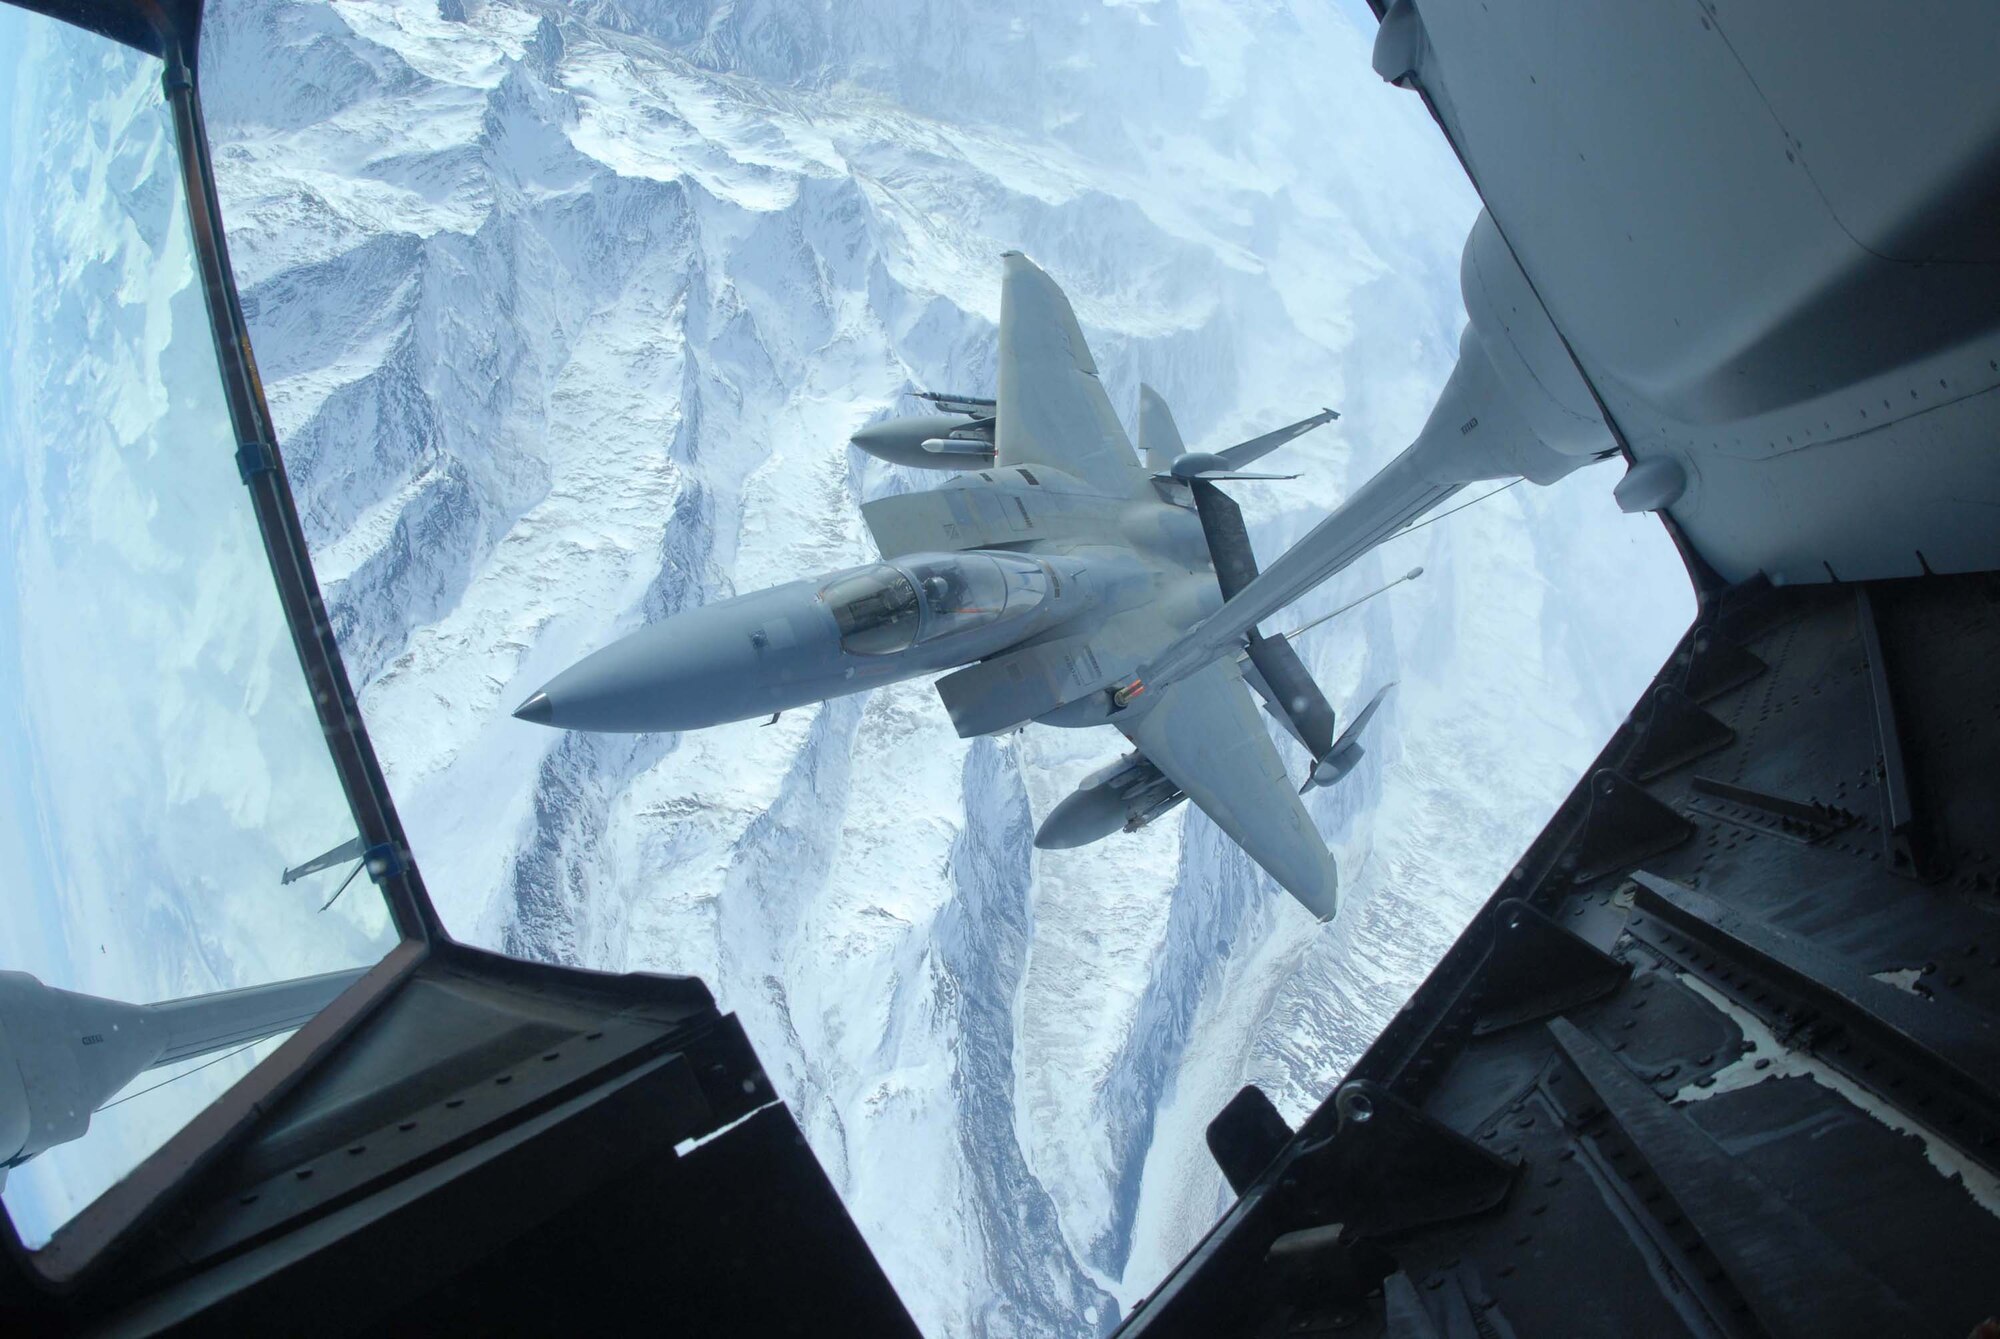 EIELSON AIR FORCE BASE, Alaska -- An F-15 Strike Eagle, 60th Fighter Squadron, Eglin AFB, Florida, receives fuel from a KC-10 extender over the Pacific Alaska Range Complex on April 18 during Red Flag-Alaska 07-1. Red Flag-Alaska is a Pacific Air Forces-directed field training exercise for U.S. forces flown under simulated air combat conditions. It is conducted on the Pacific Alaskan Range Complex with air operations flown out of Eielson and Elmendorf Air Force Bases. (U.S. Air Force Photo by Airman 1st Class Jonathan Snyder) 